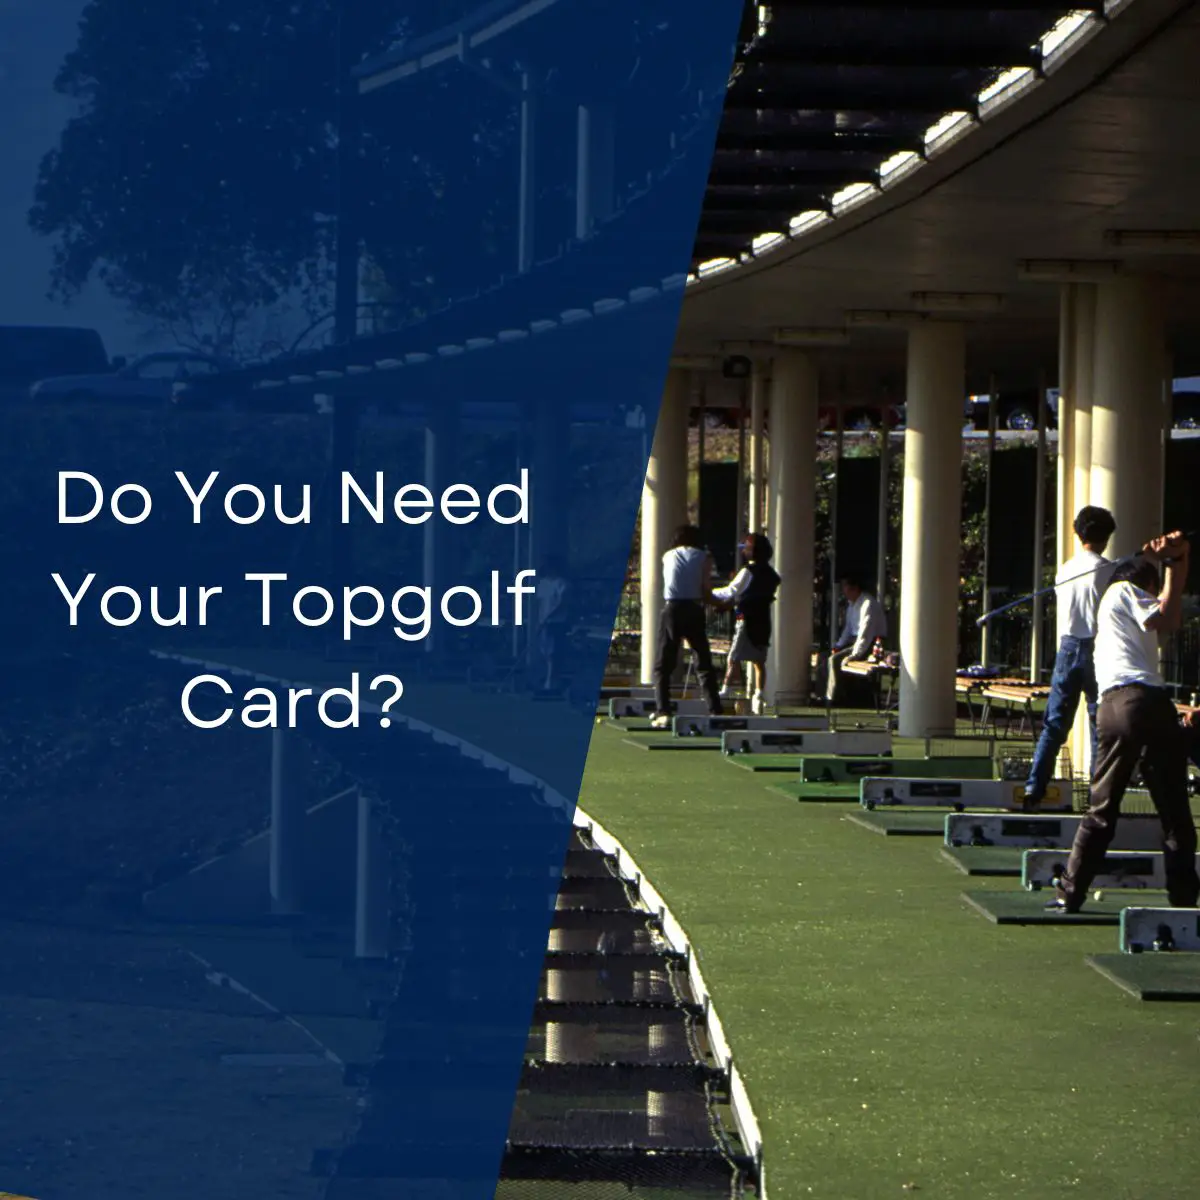 Do You Need Your Topgolf Card?